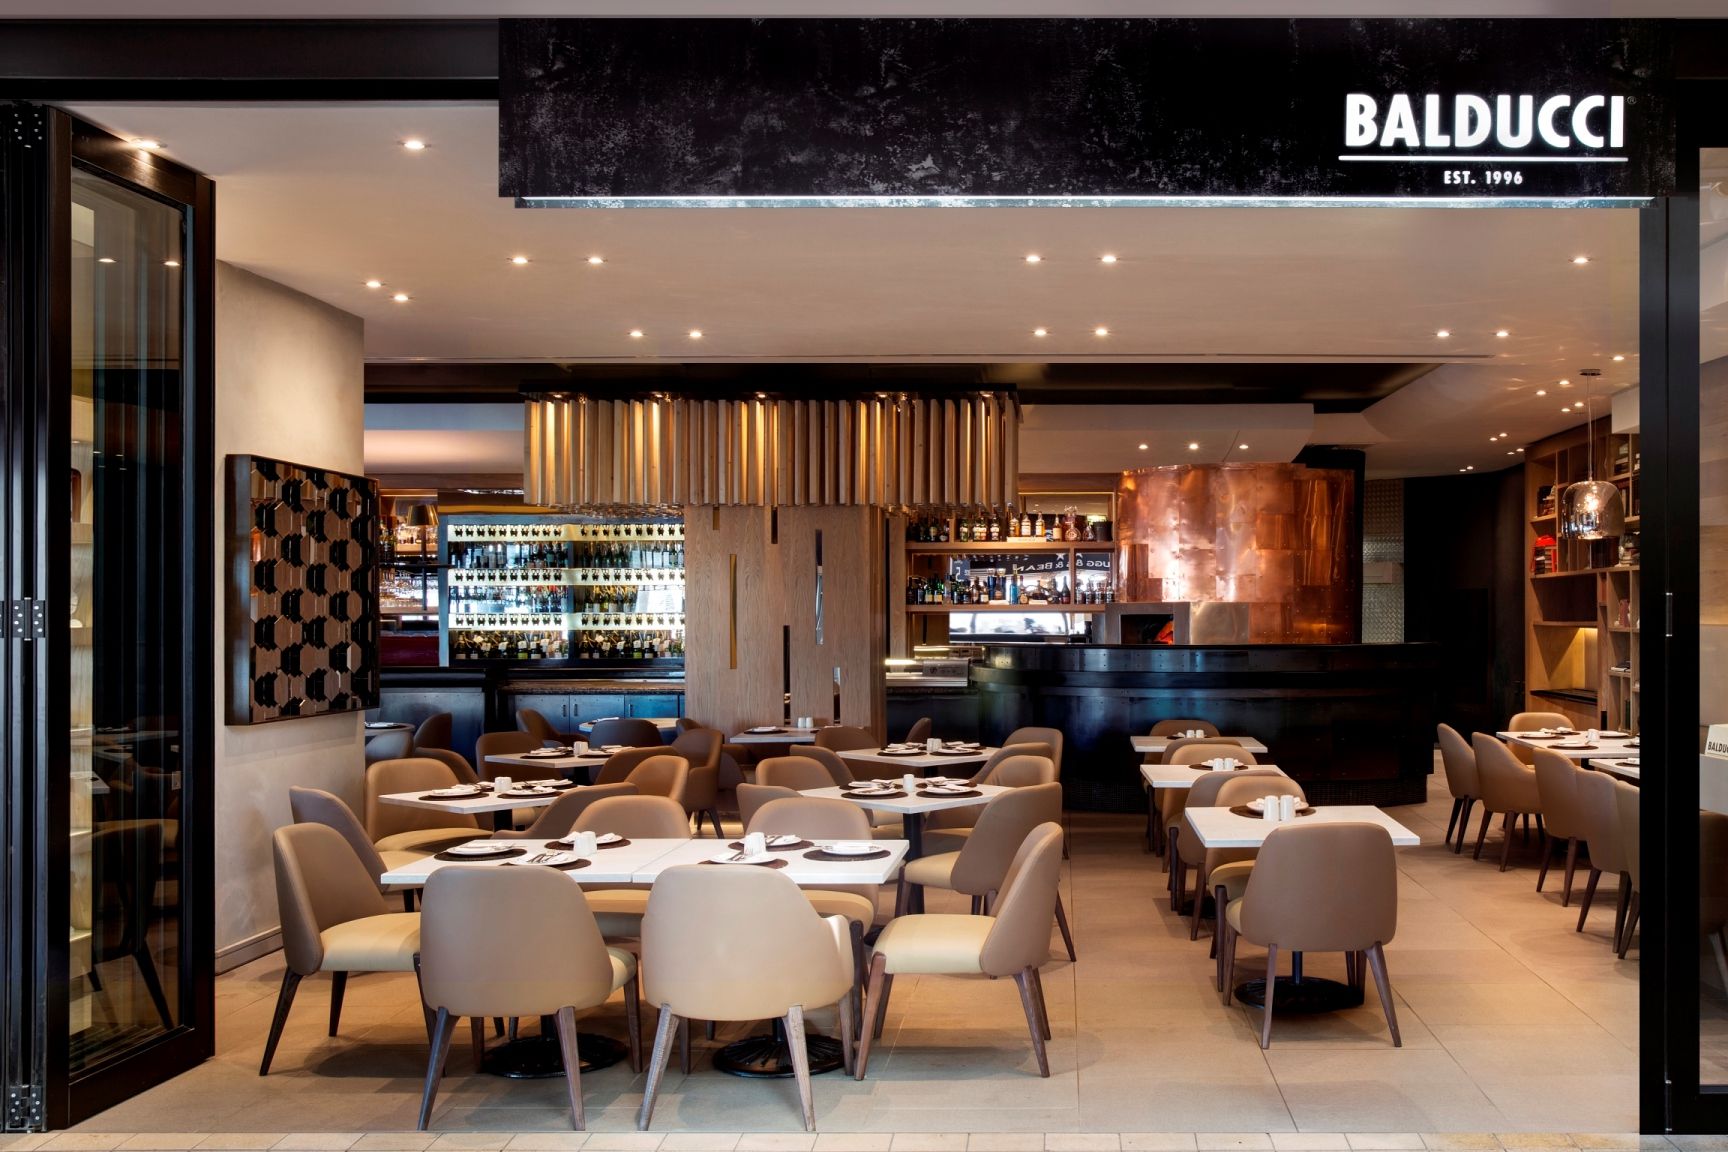 Blending old-world Italian style with new-world taste updates at Balducci